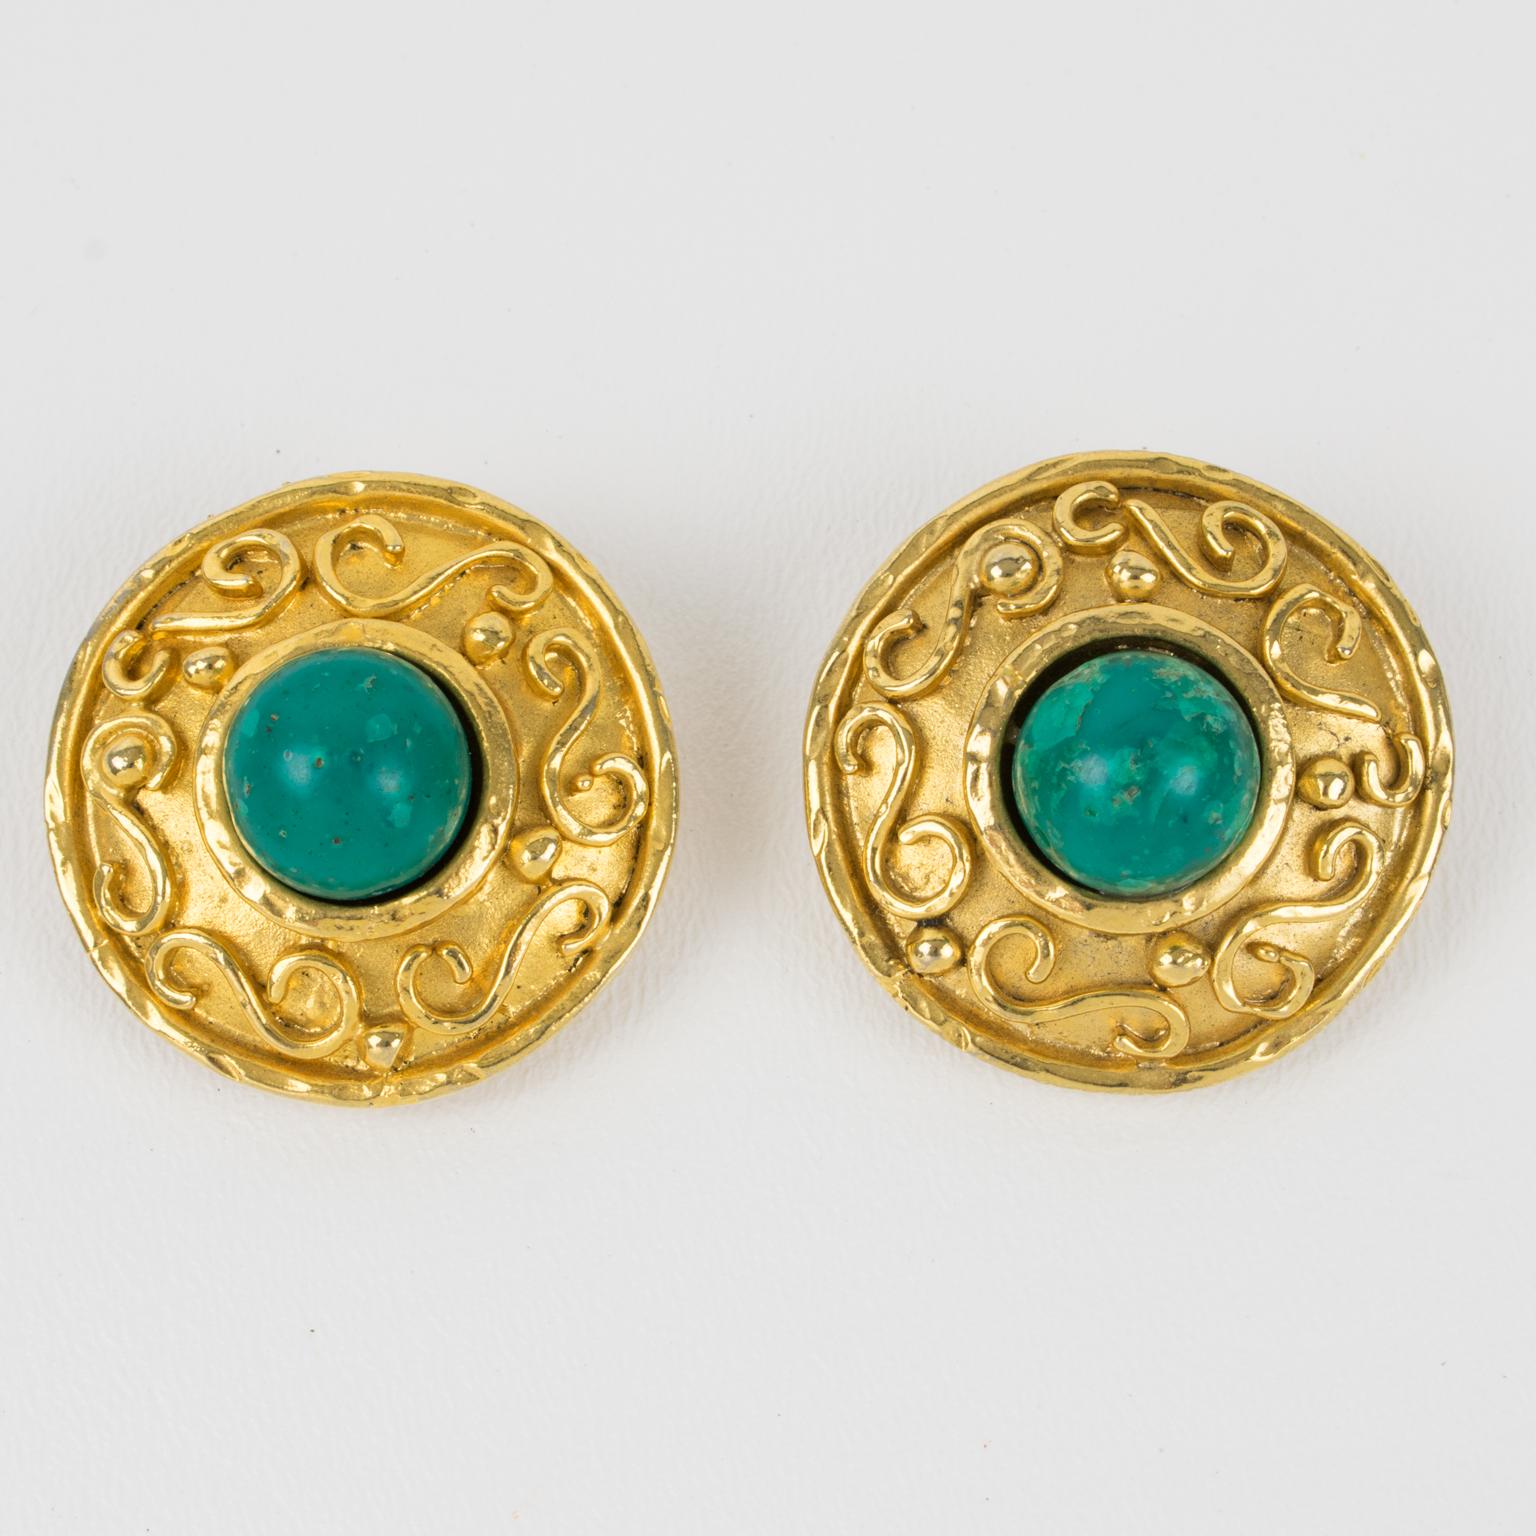 Byzantine Edouard Rambaud Paris Clip Earrings with Turquoise Resin Cabochon For Sale